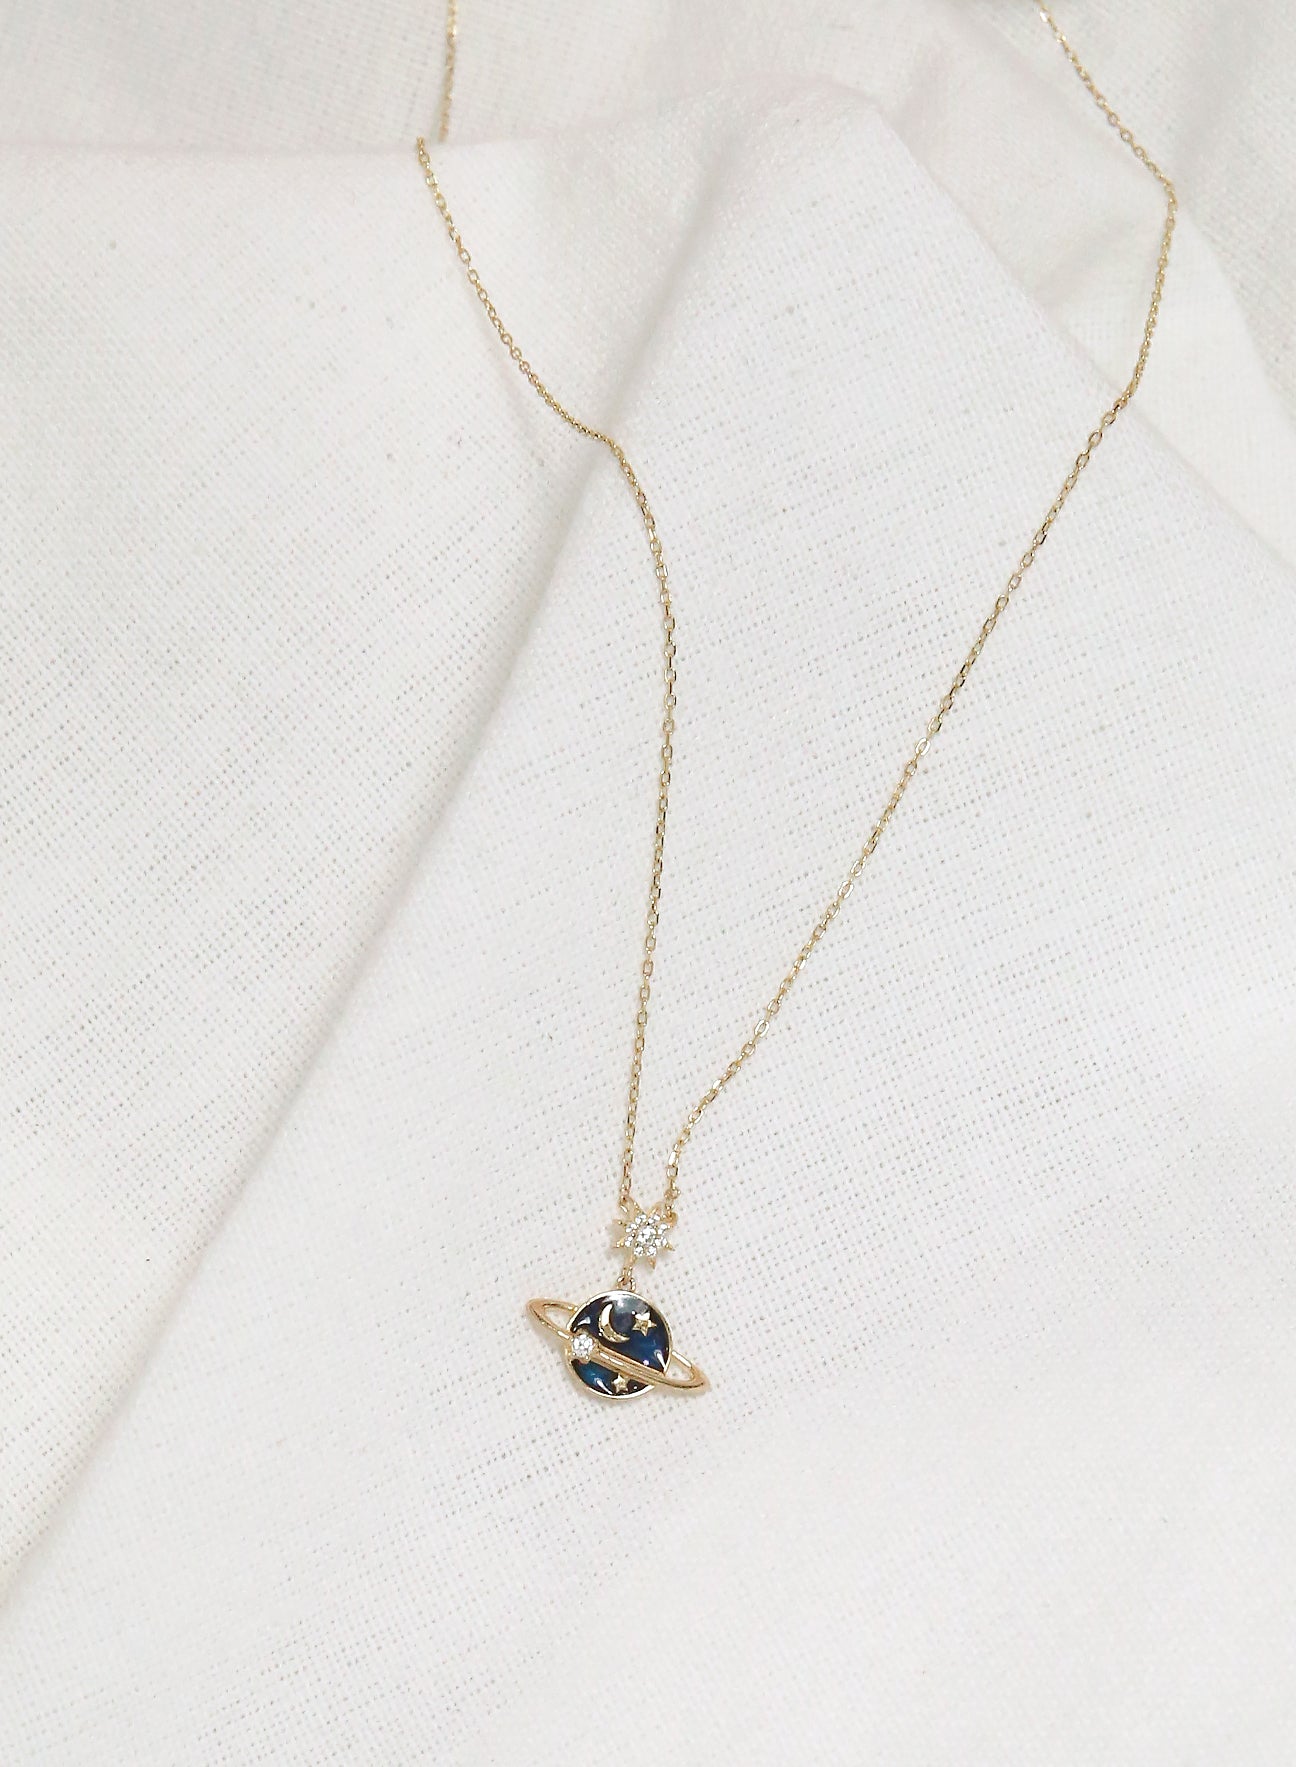 Starry Saturn Necklace (Gold)